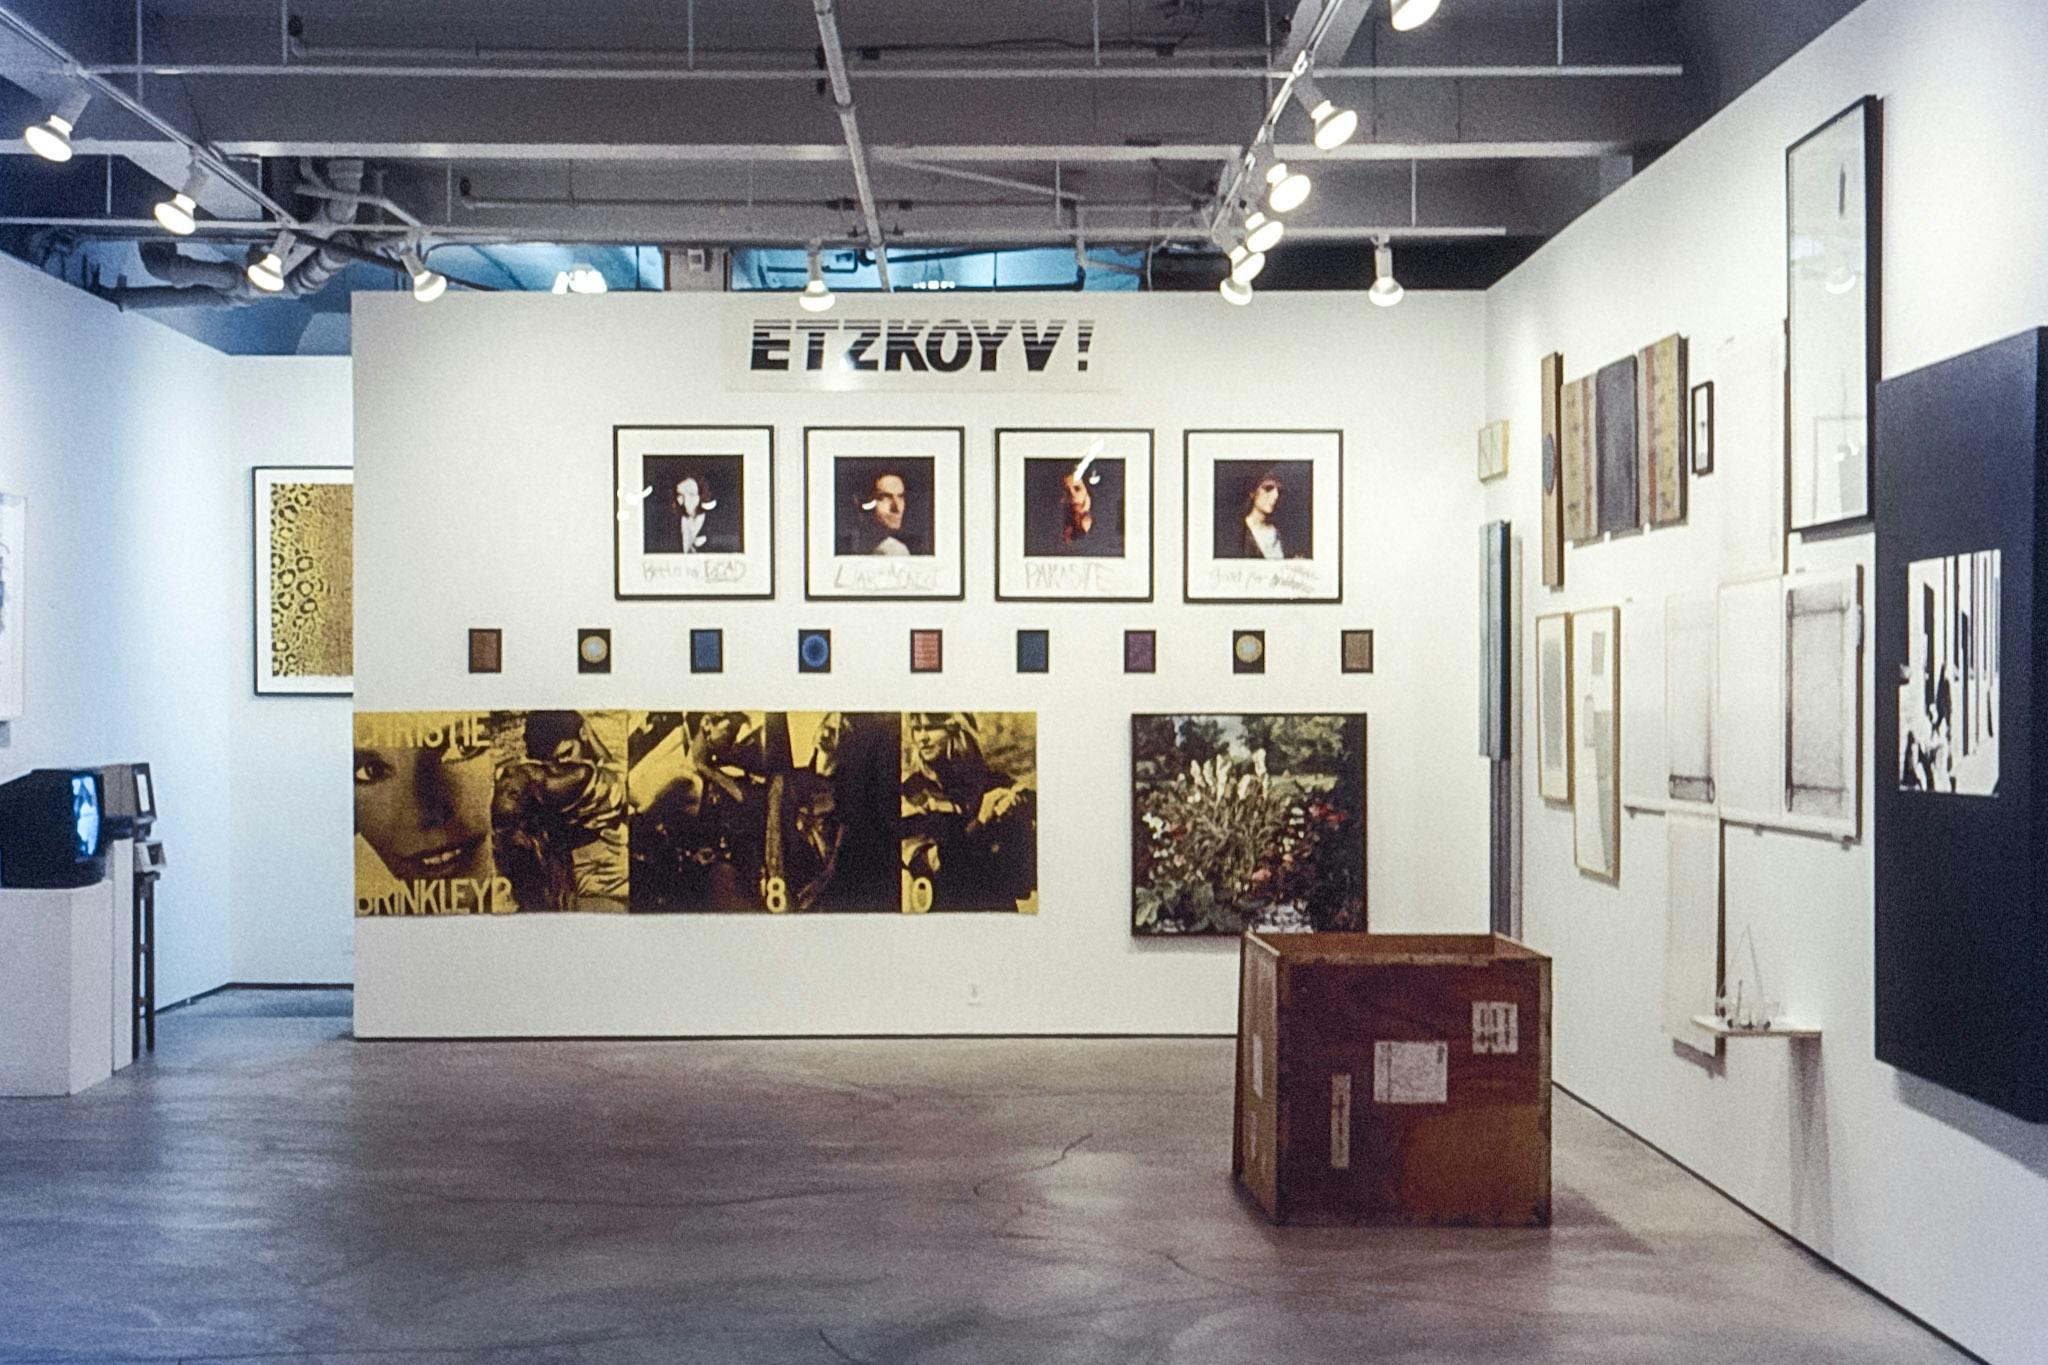 A photo of various artworks installed close to each other in the gallery. In the middle wall, the capital letter “ETZKOYV!” is placed on the top, and placed beneath are photographs of diverse people.